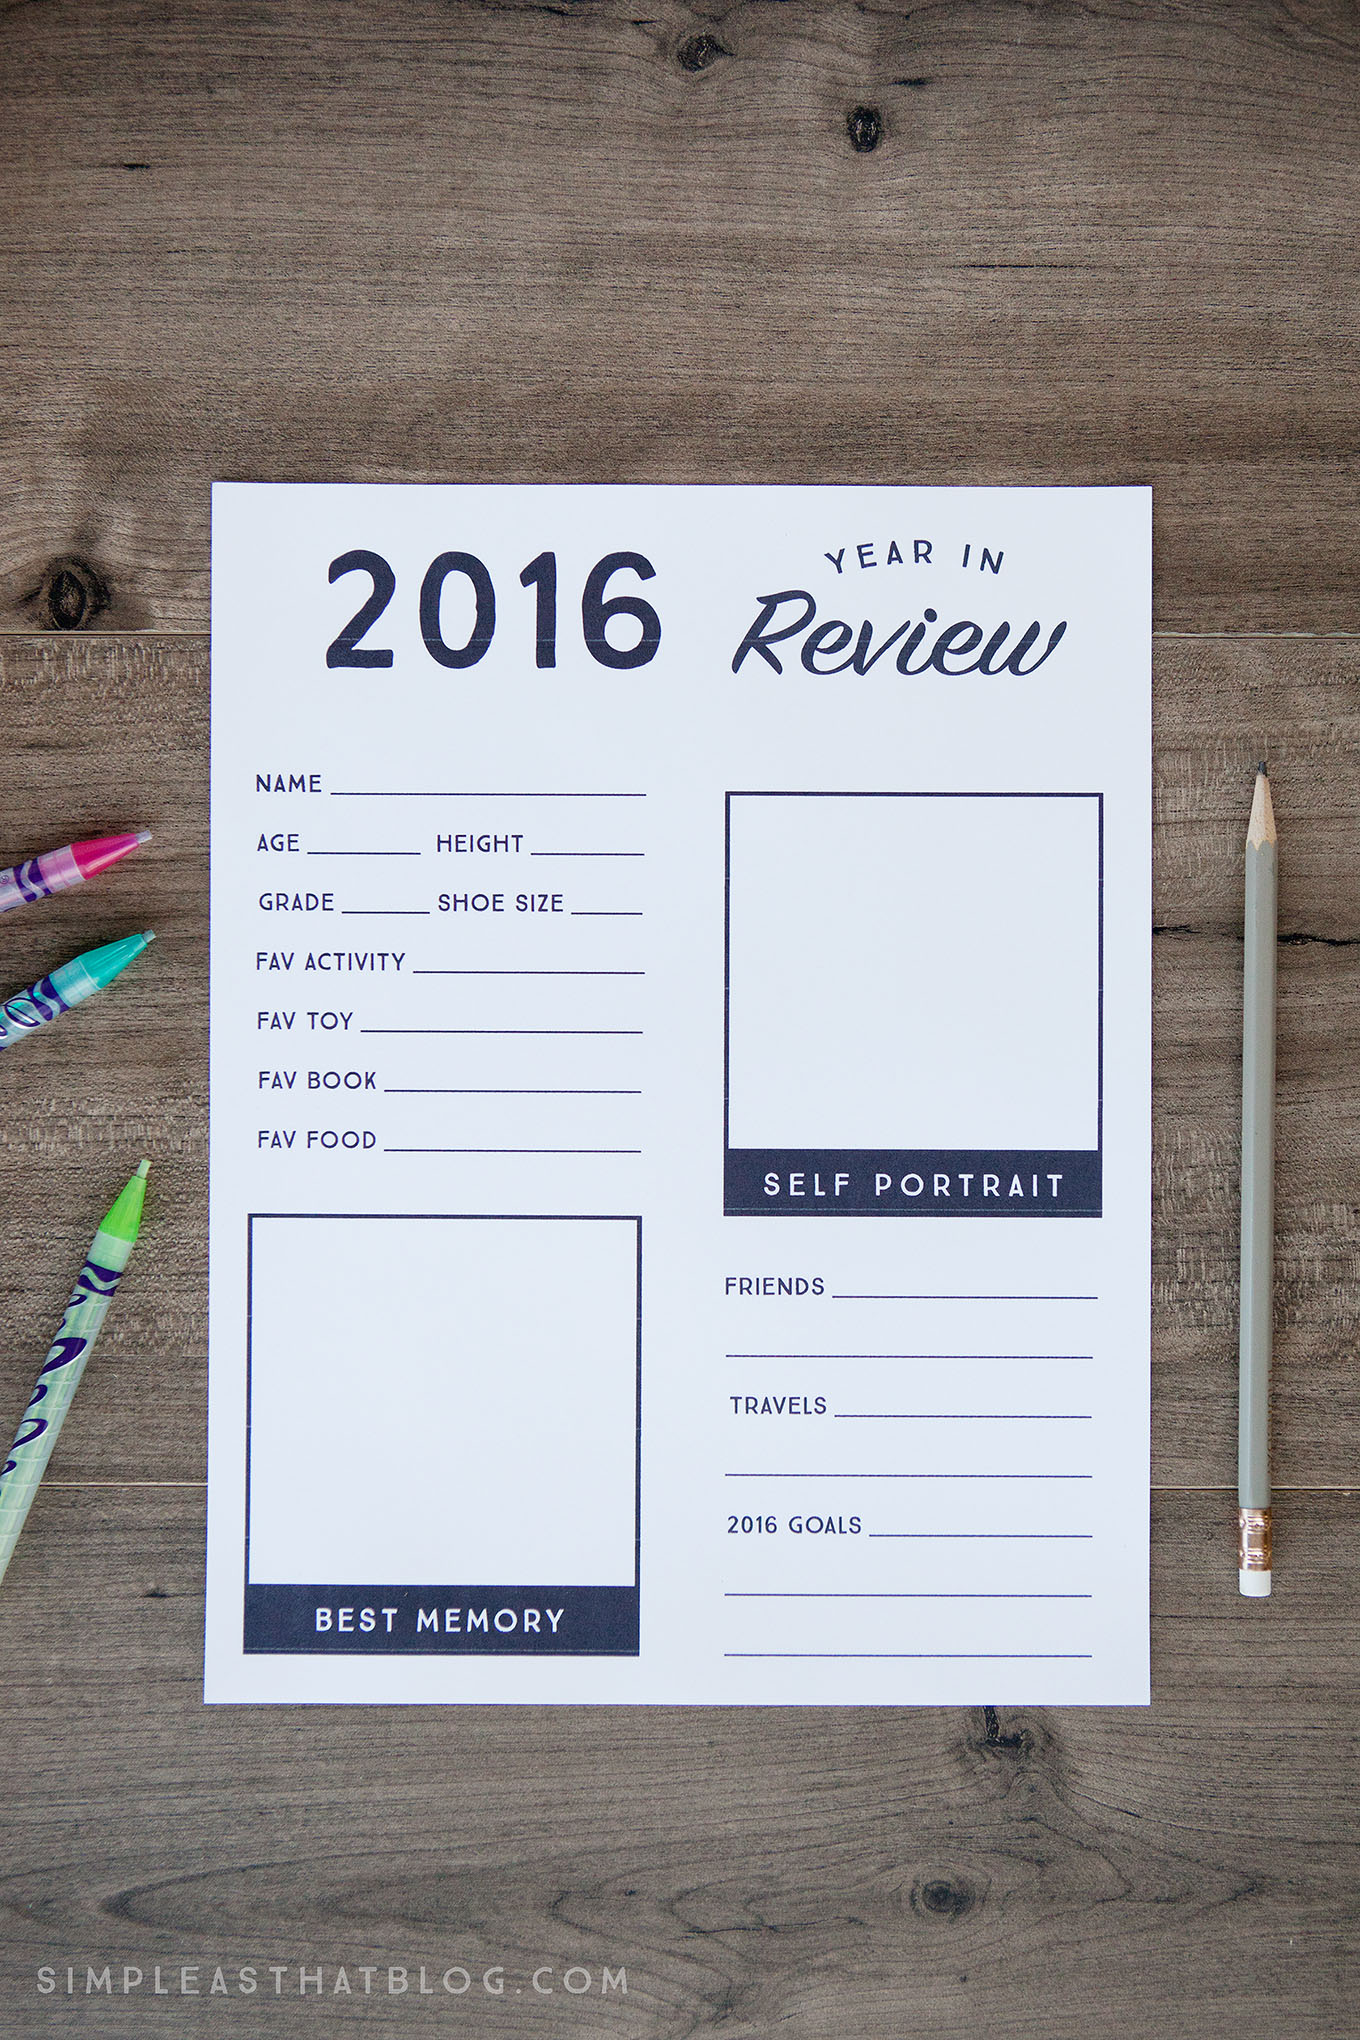 This free printable year in review sheet gives kids a chance to reflect on their favorite memories from the past year and look ahead to new goals and adventures in 2016!